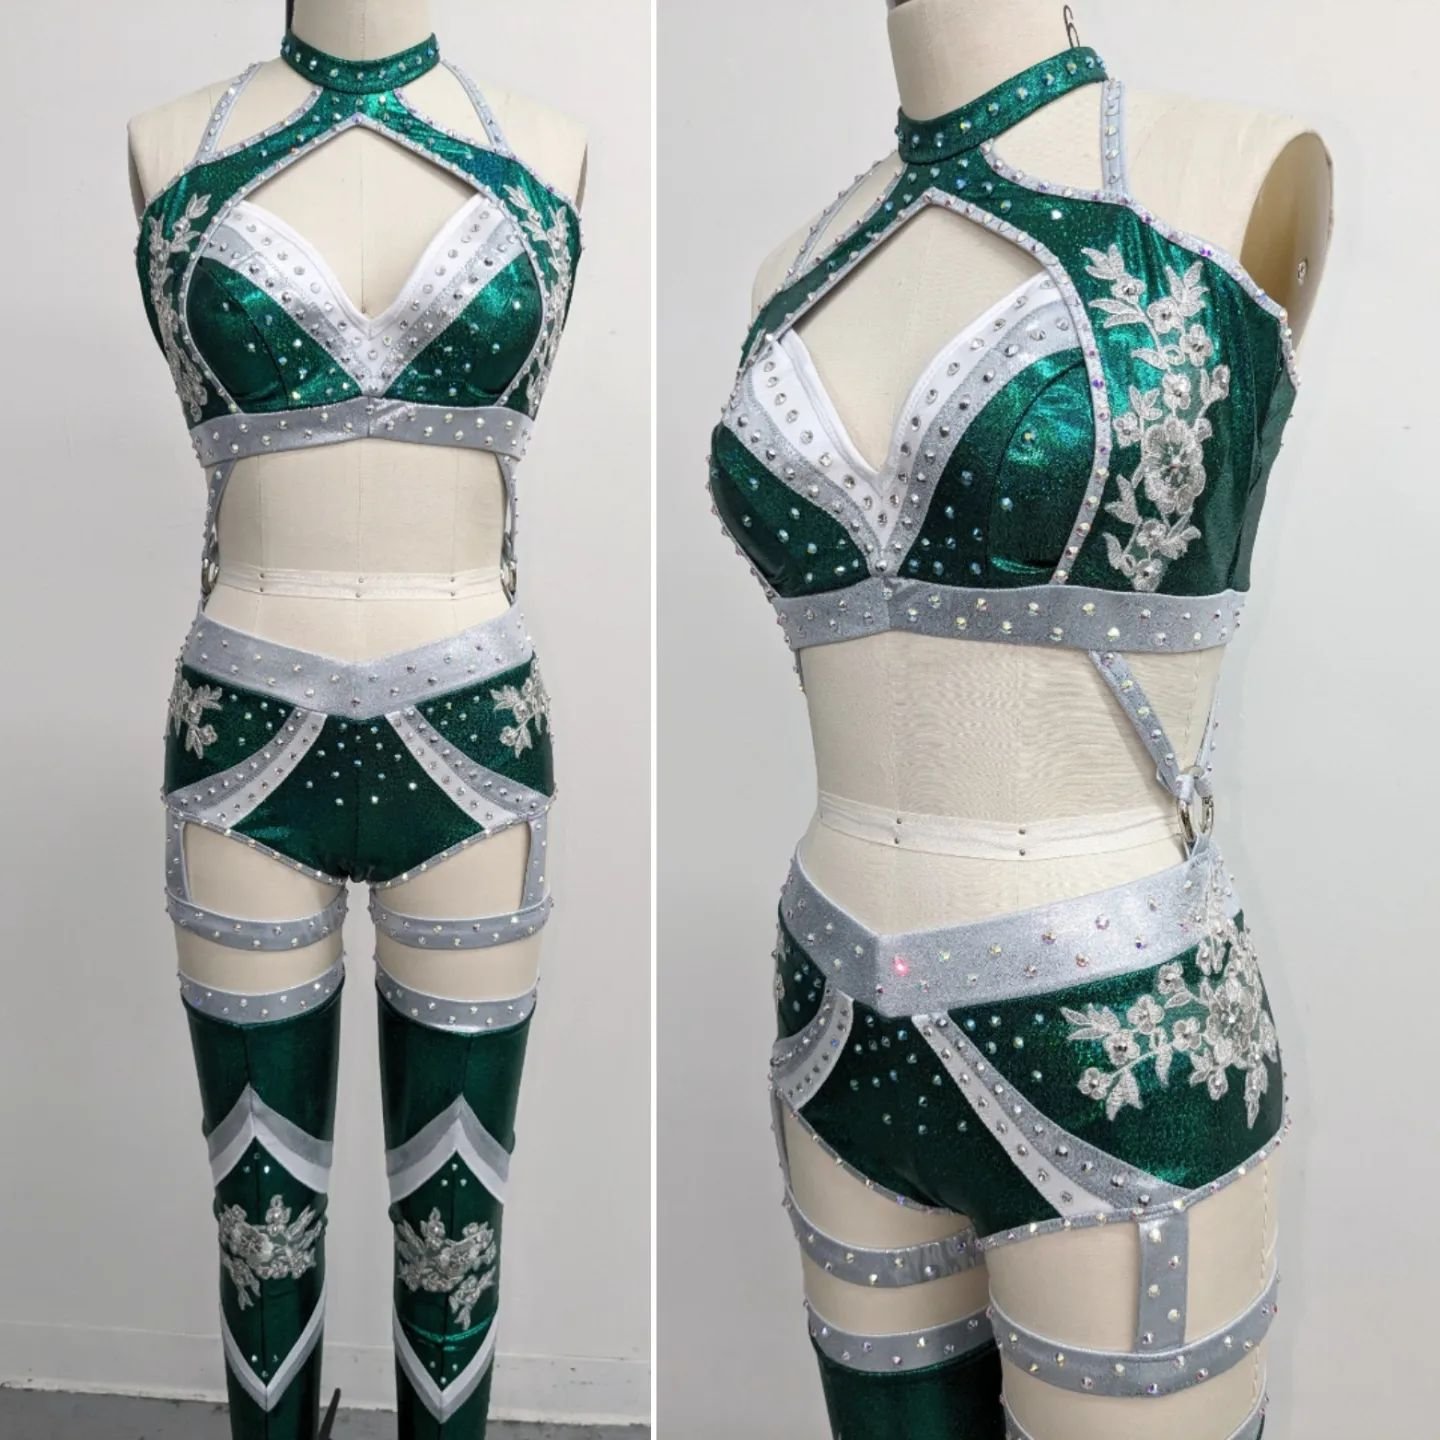 Close up photos of the new gear designed and made for @kelani_wwe for NXT Stand and Deliver!! Loved using the silver lace to add texture!
💚🤍💚
#nxt @wwenxt #standanddeliver #wwe @wwe #wrestlemania40 #wrestlemania #womenswrestling #wrestlinggear #pr